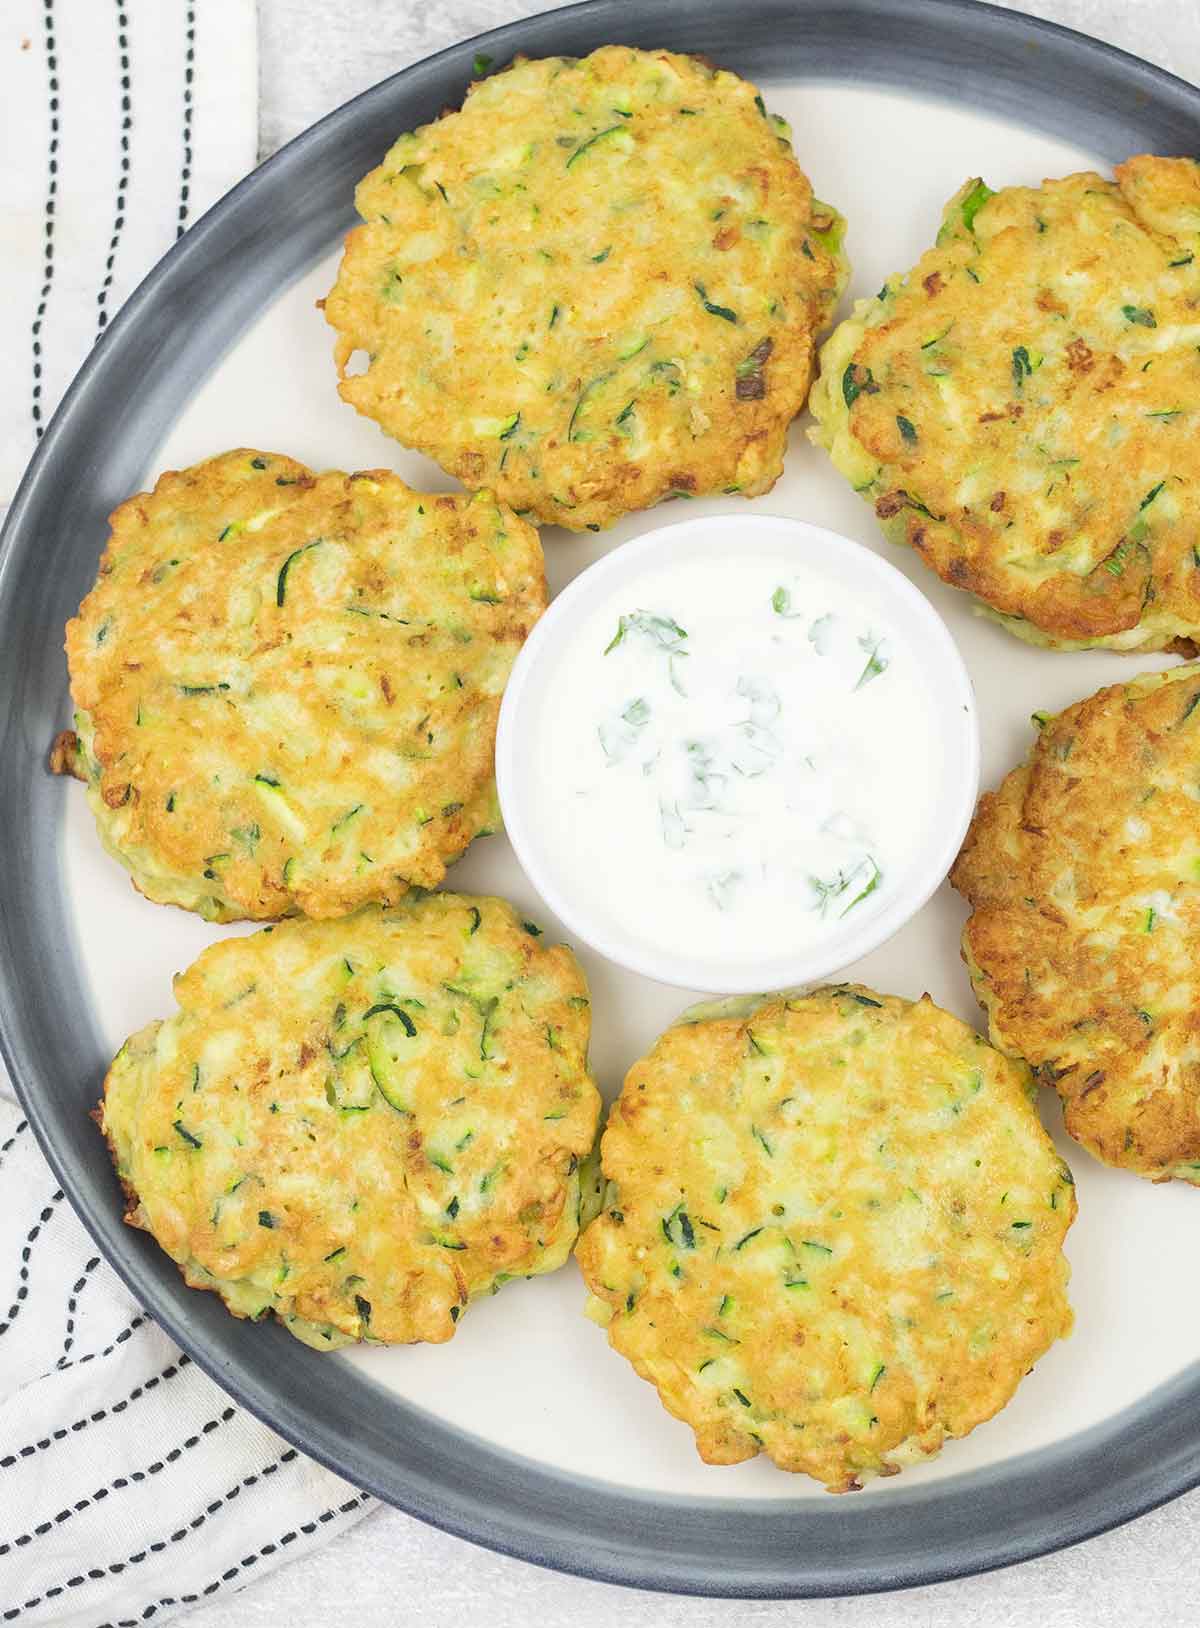 Zucchini pancakes on a serving plate and a bowl of sour cream sauce.